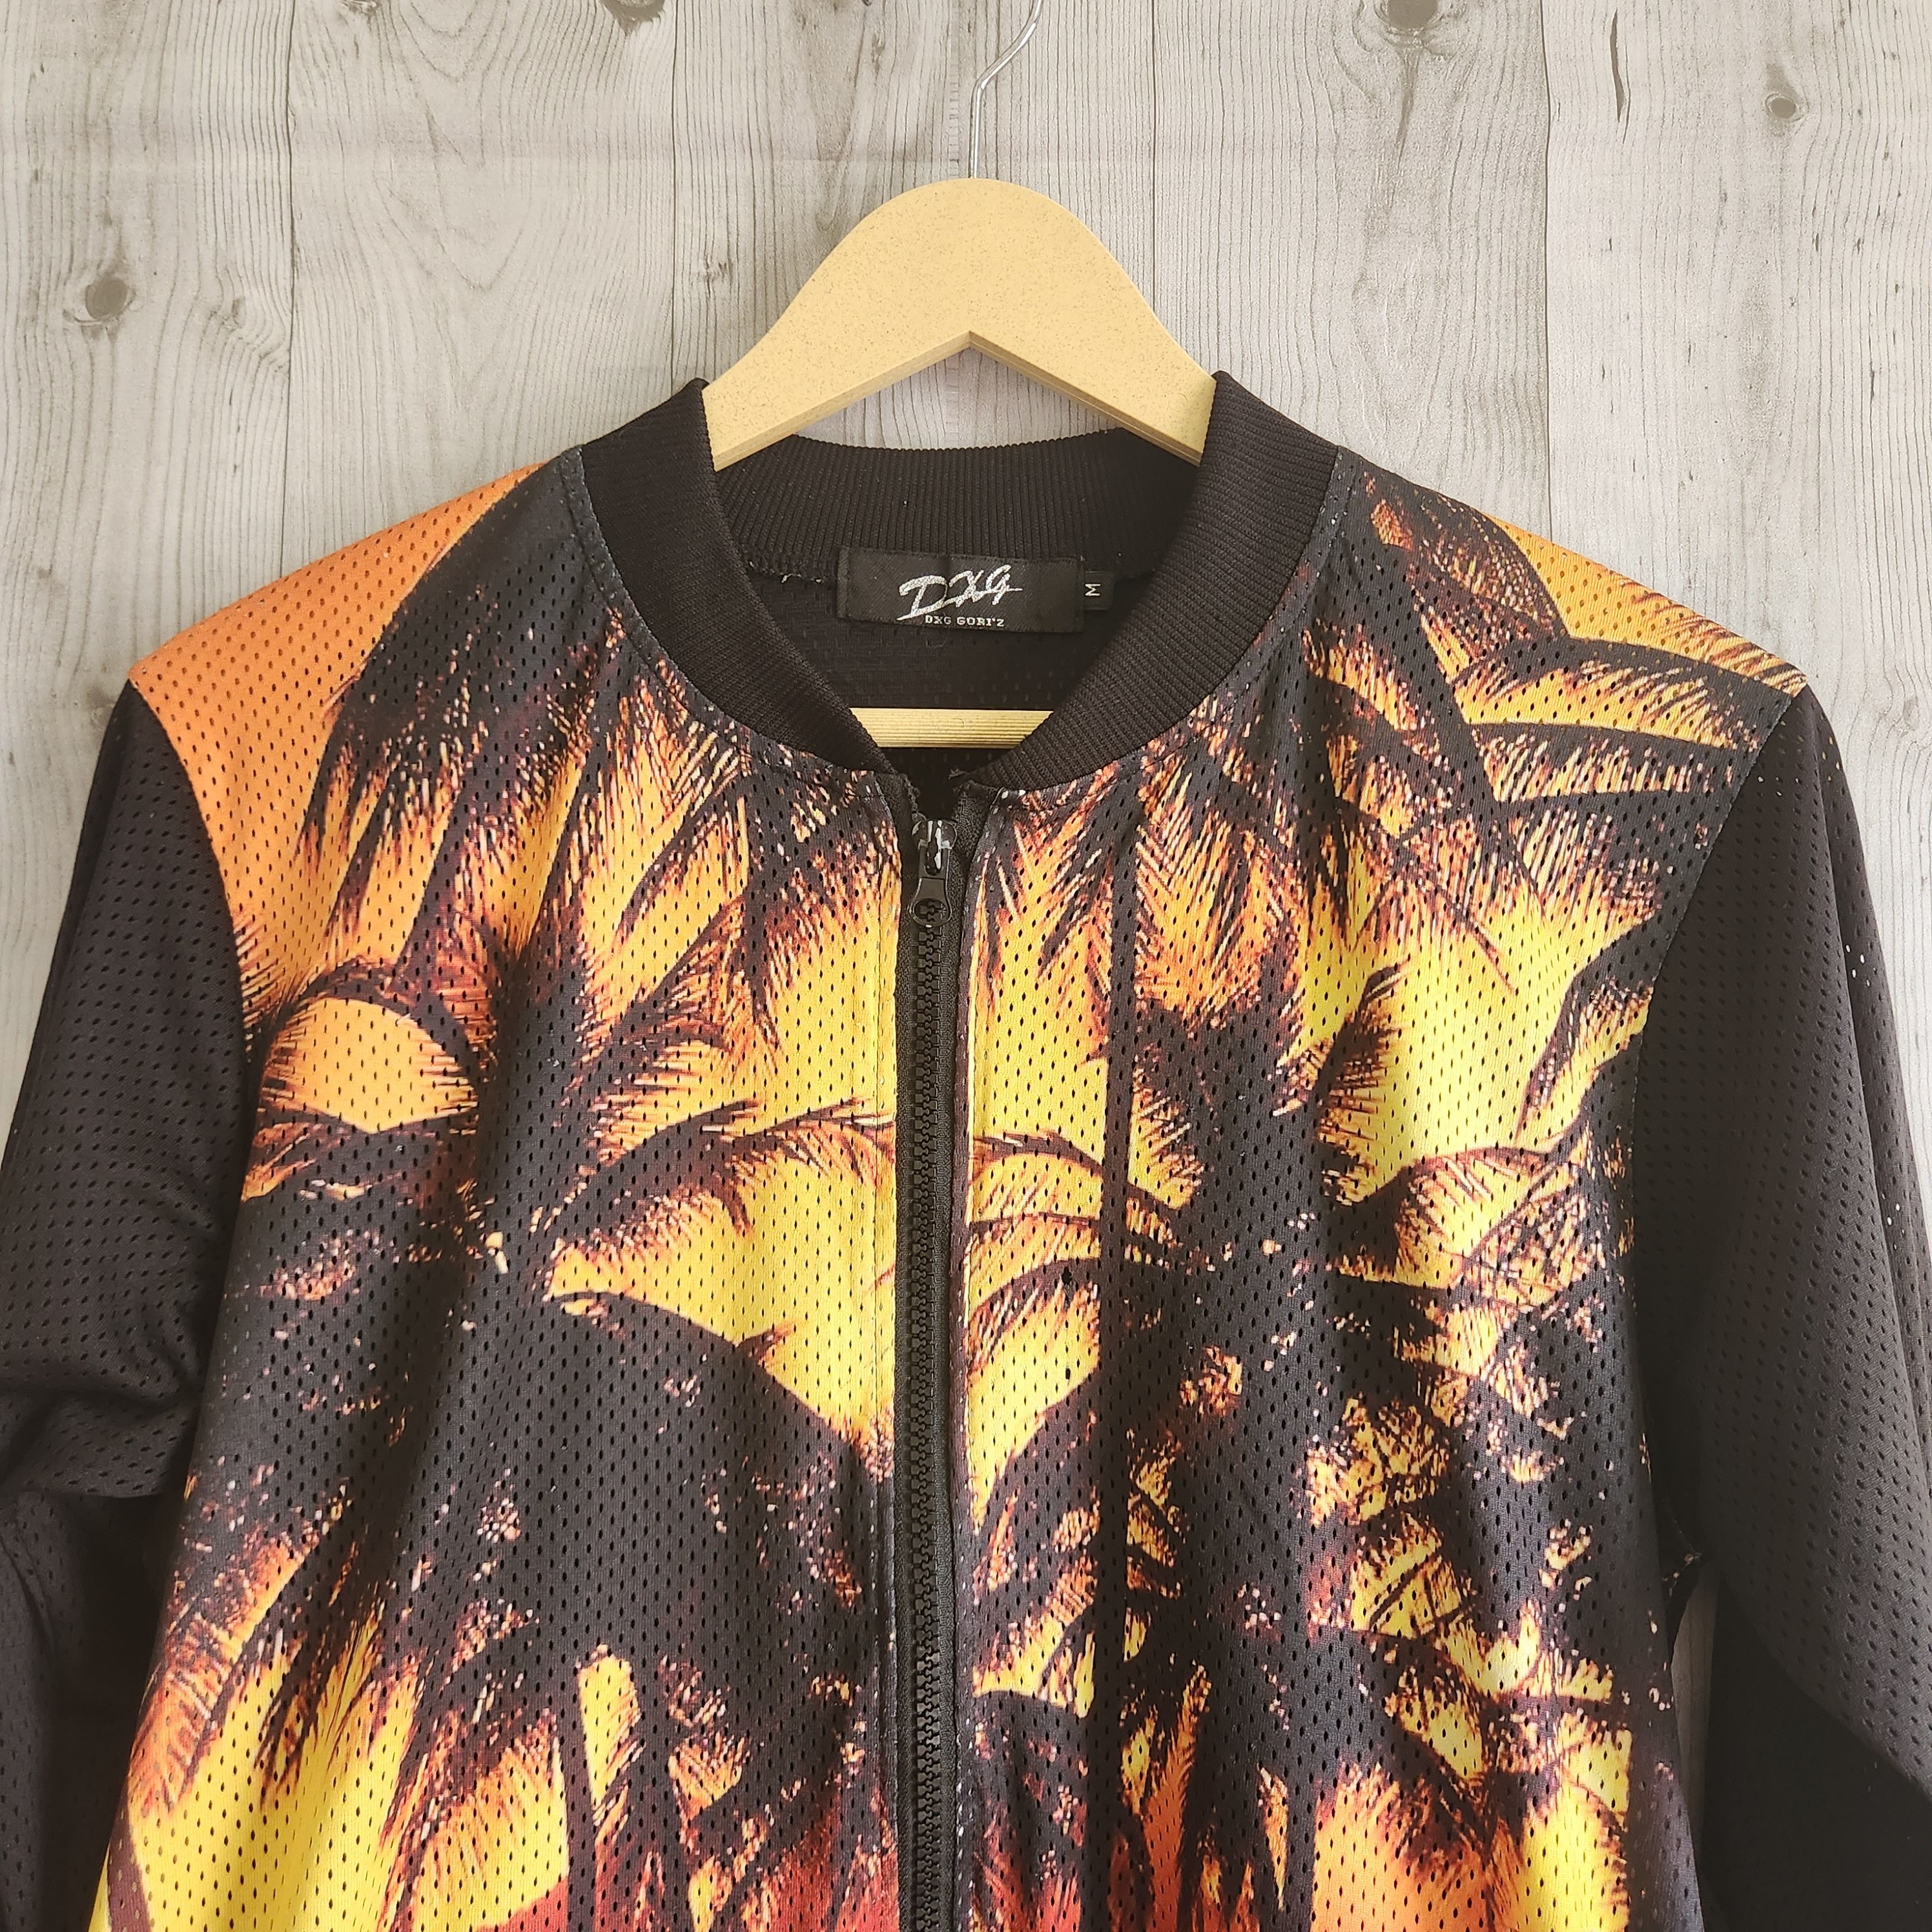 Japanese Brand - Steal Mesh Jacket With Coconut Beach Printed - 17